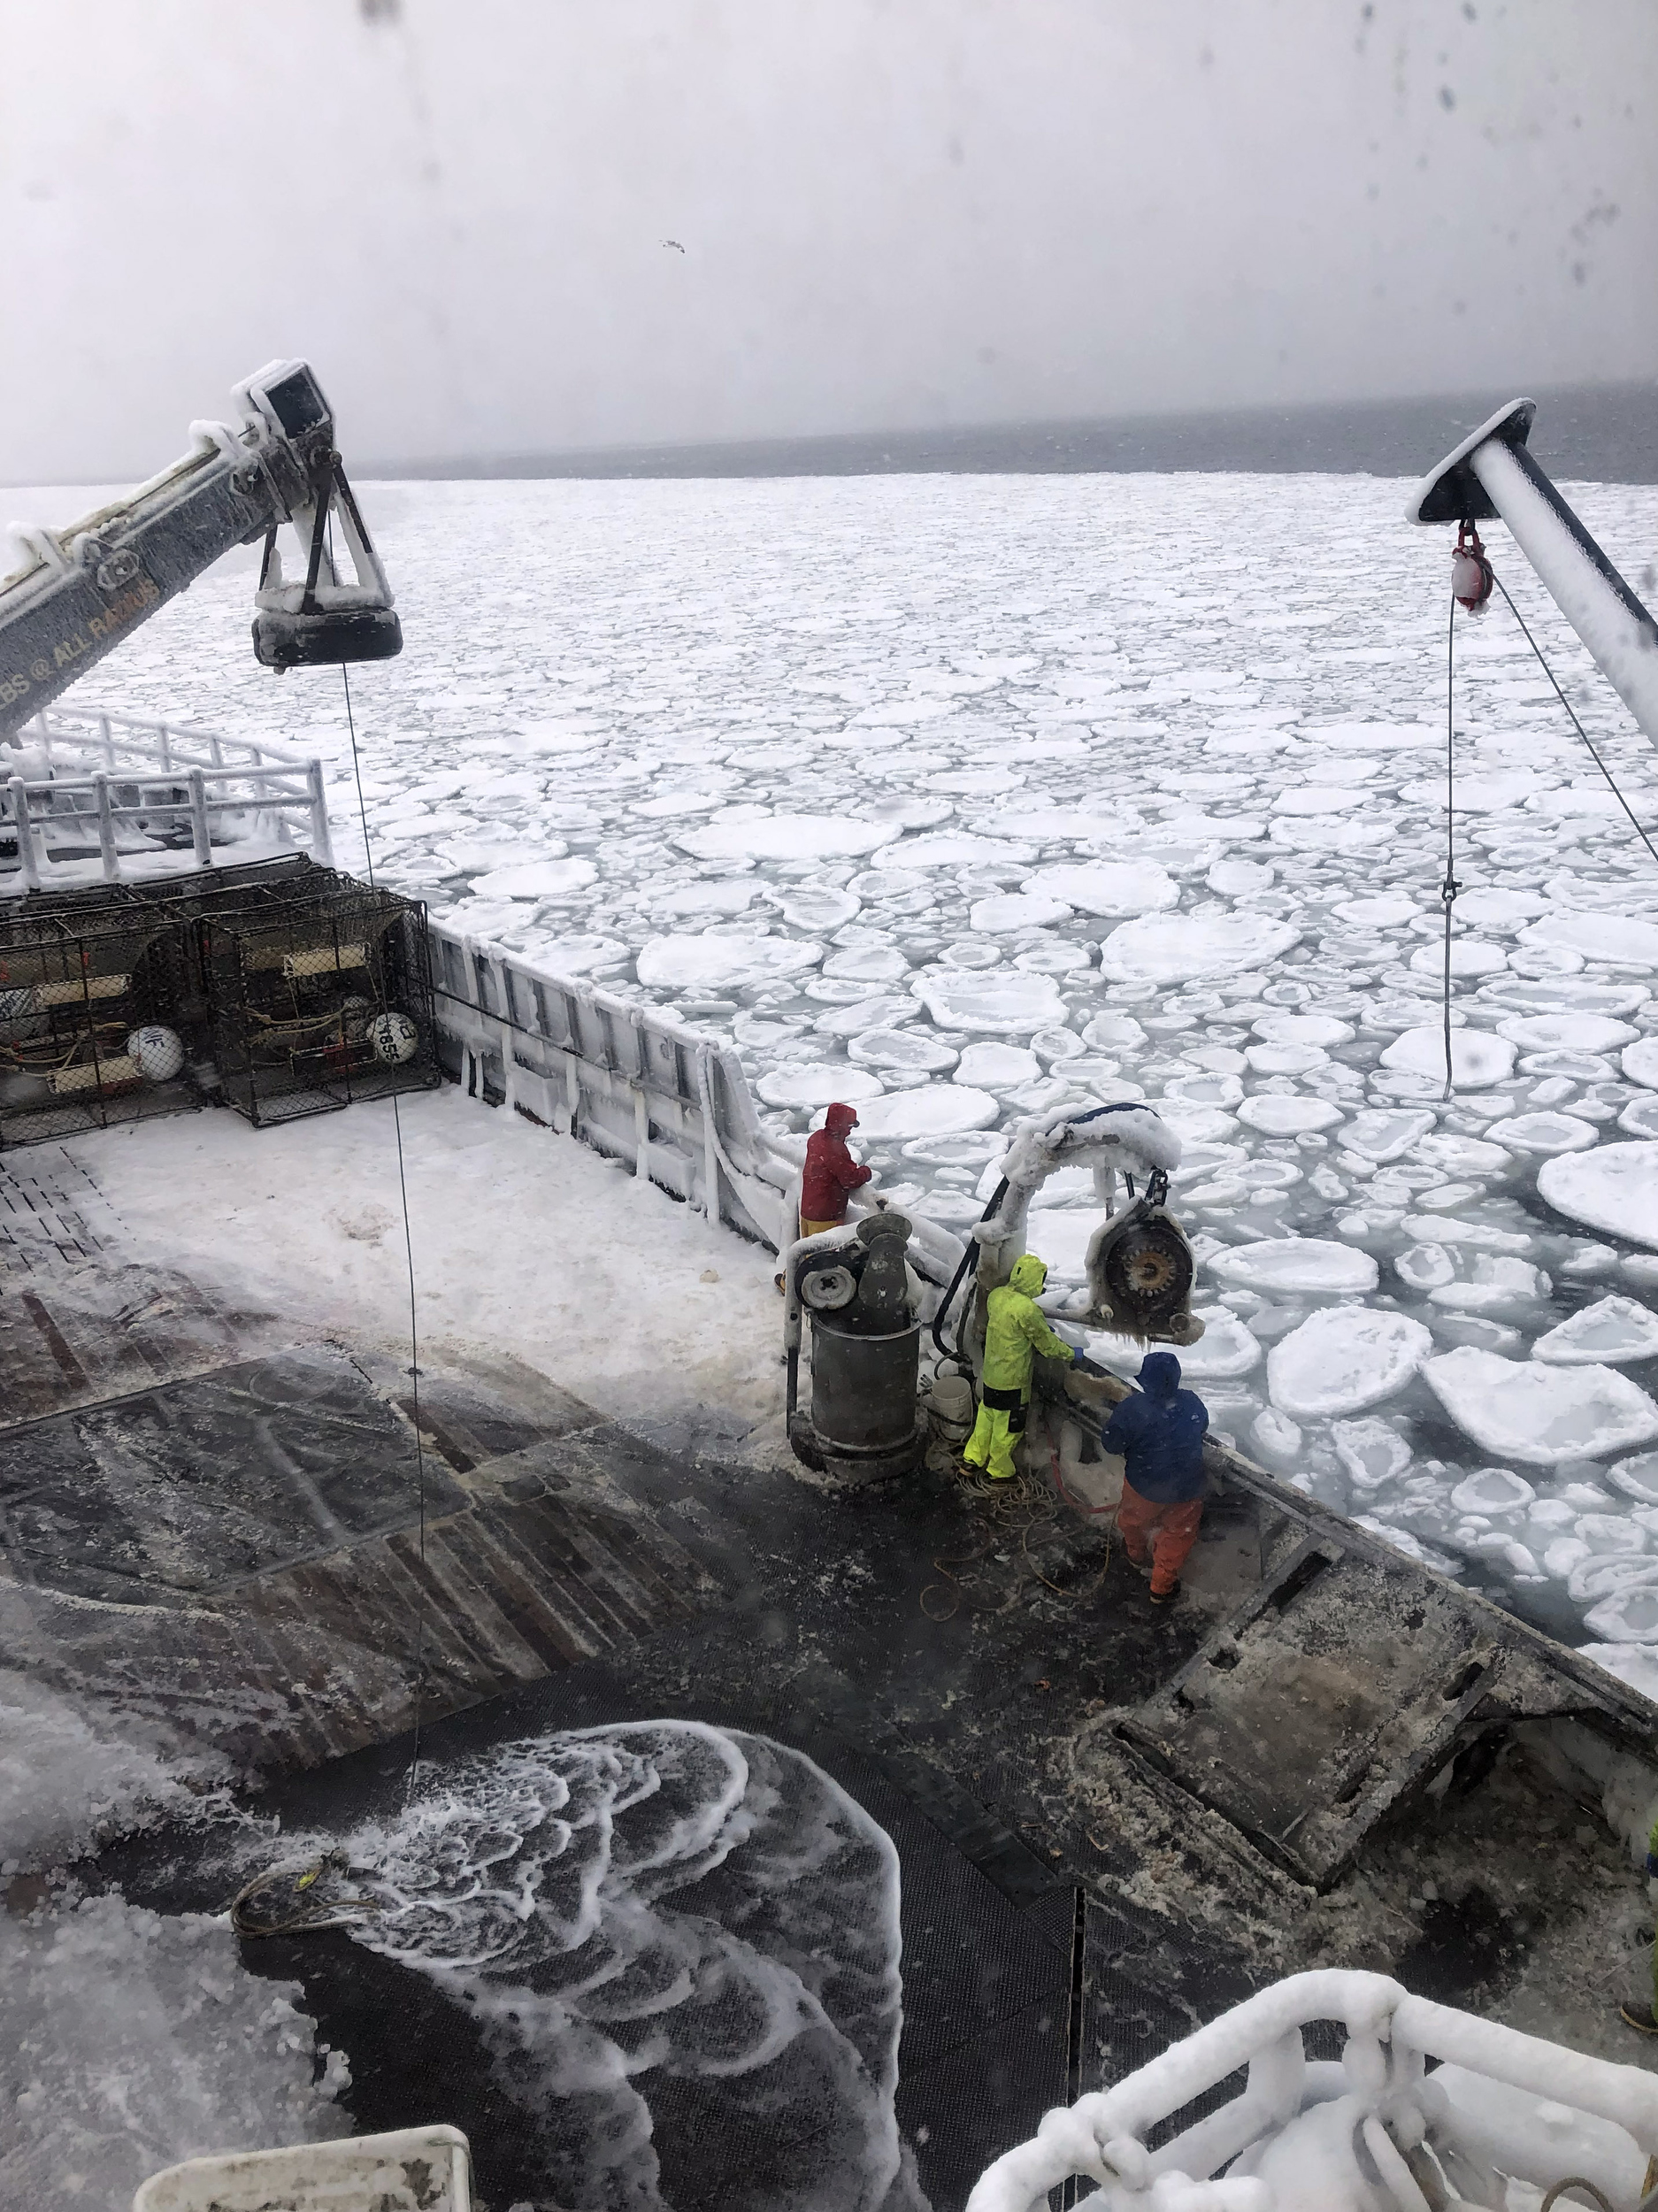 Ship crew on a boat that is surrounded by sea ice